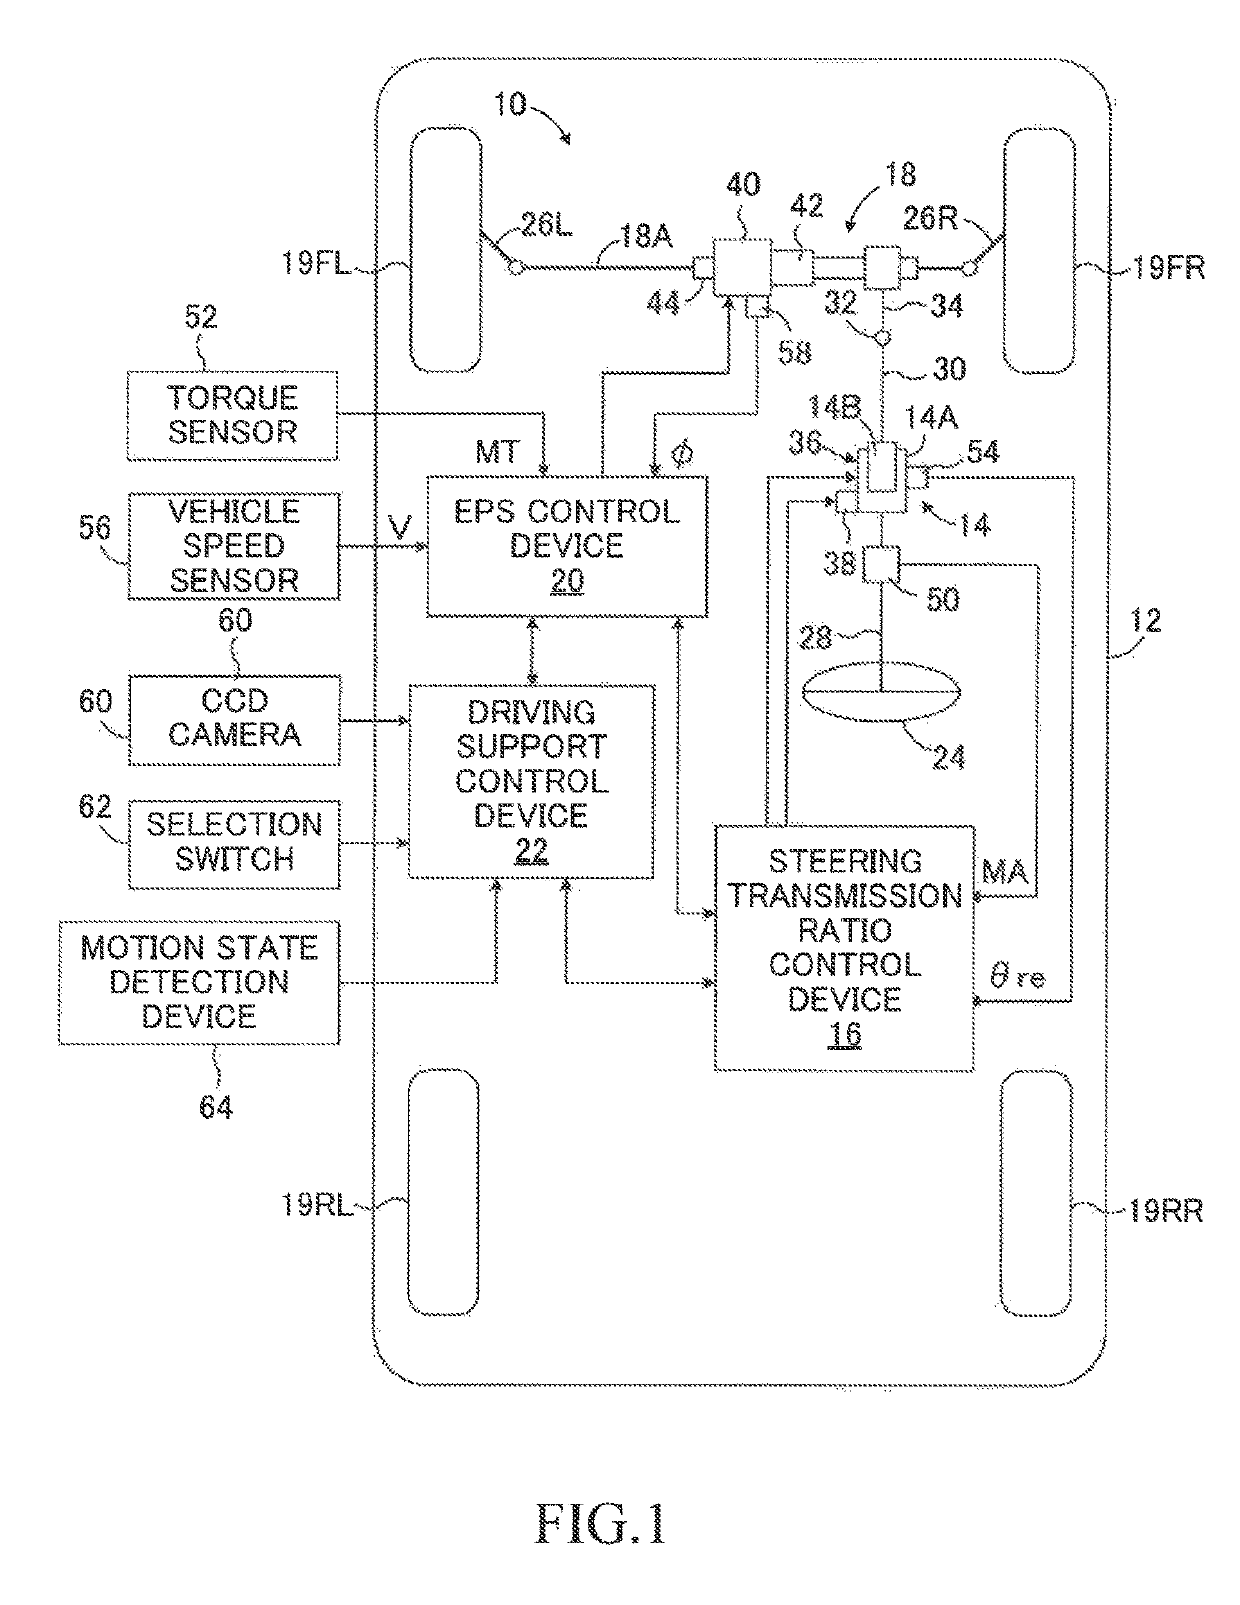 Travel control device for vehicle